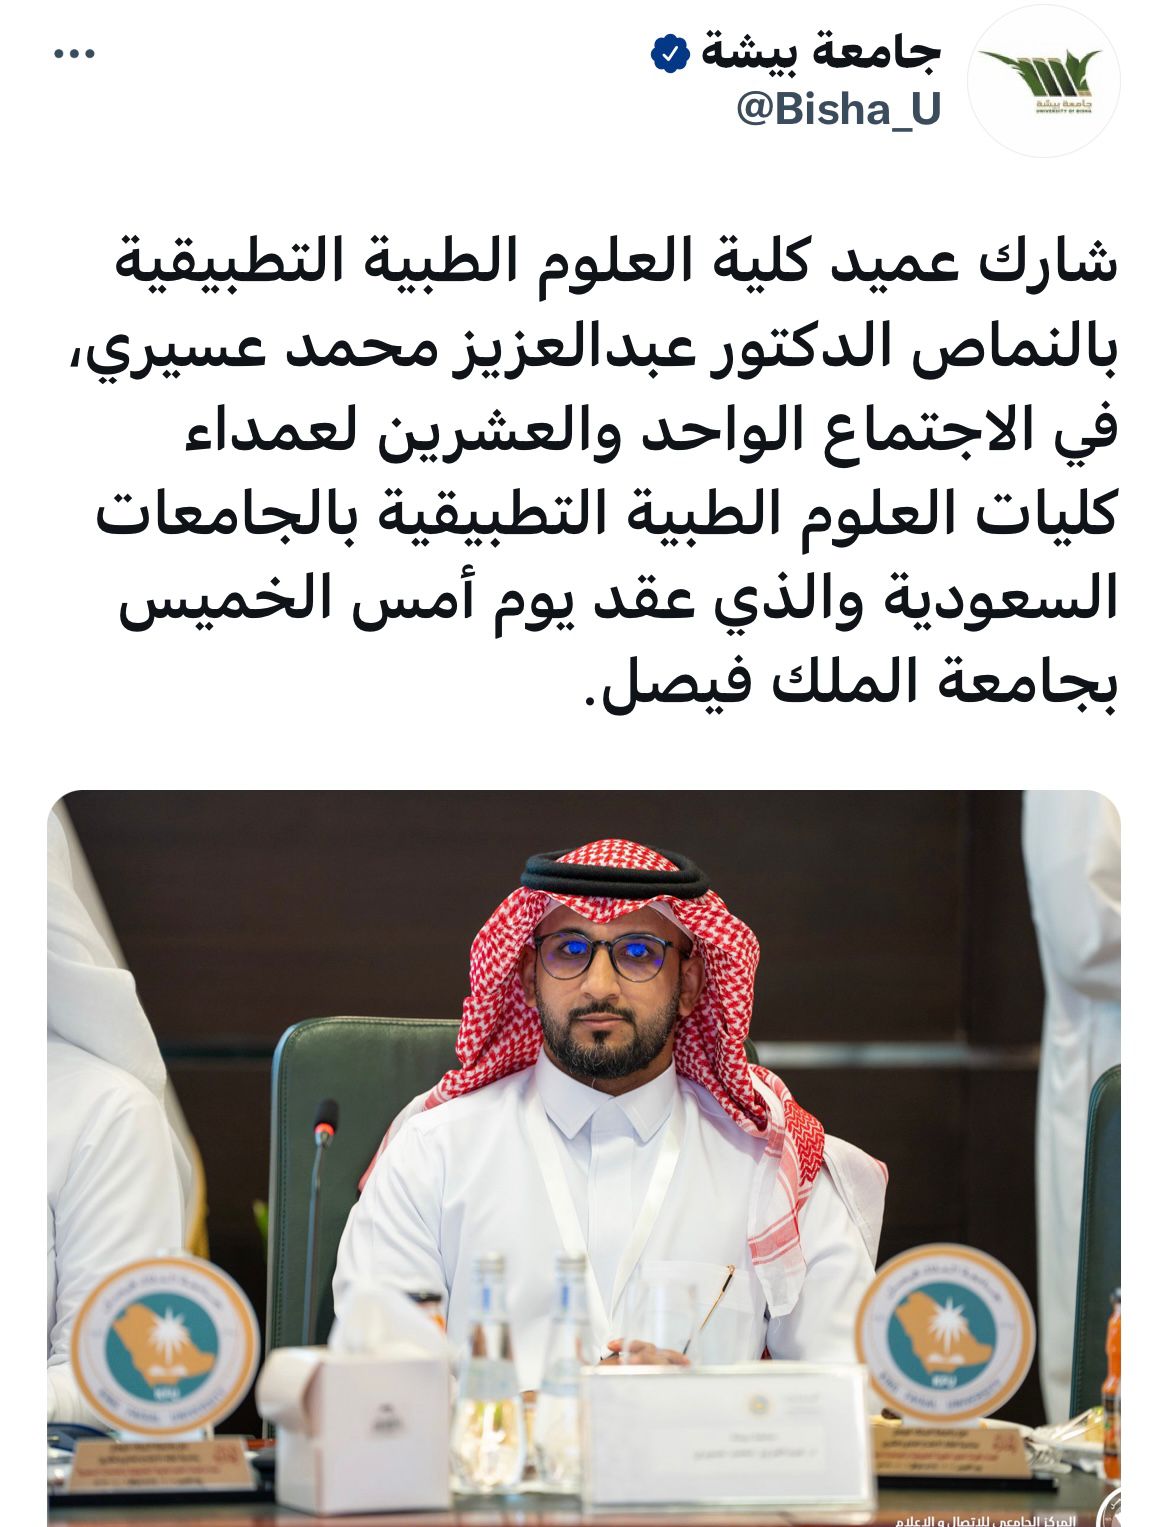 The Dean’s participation in the twenty-first meeting at King Faisal University